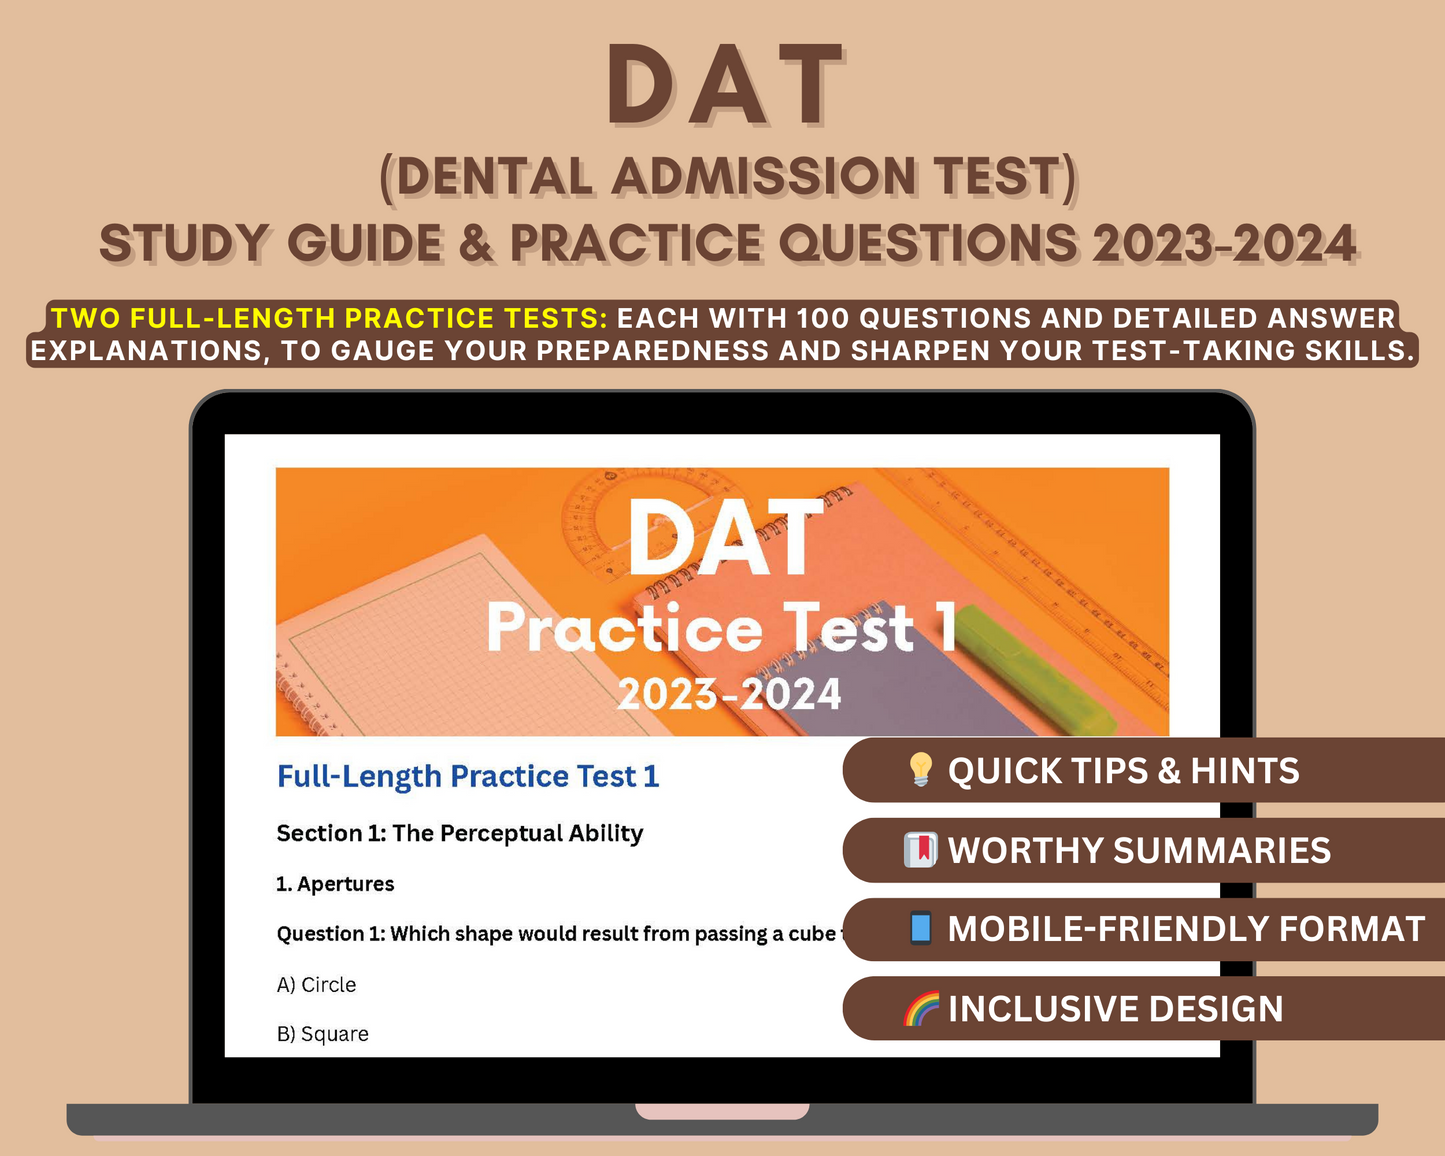 DAT Study Guide 2023-2024: In-Depth Content Review, Practice Tests & Exam Tips for Dental Admission Test | DAT Exam Prep